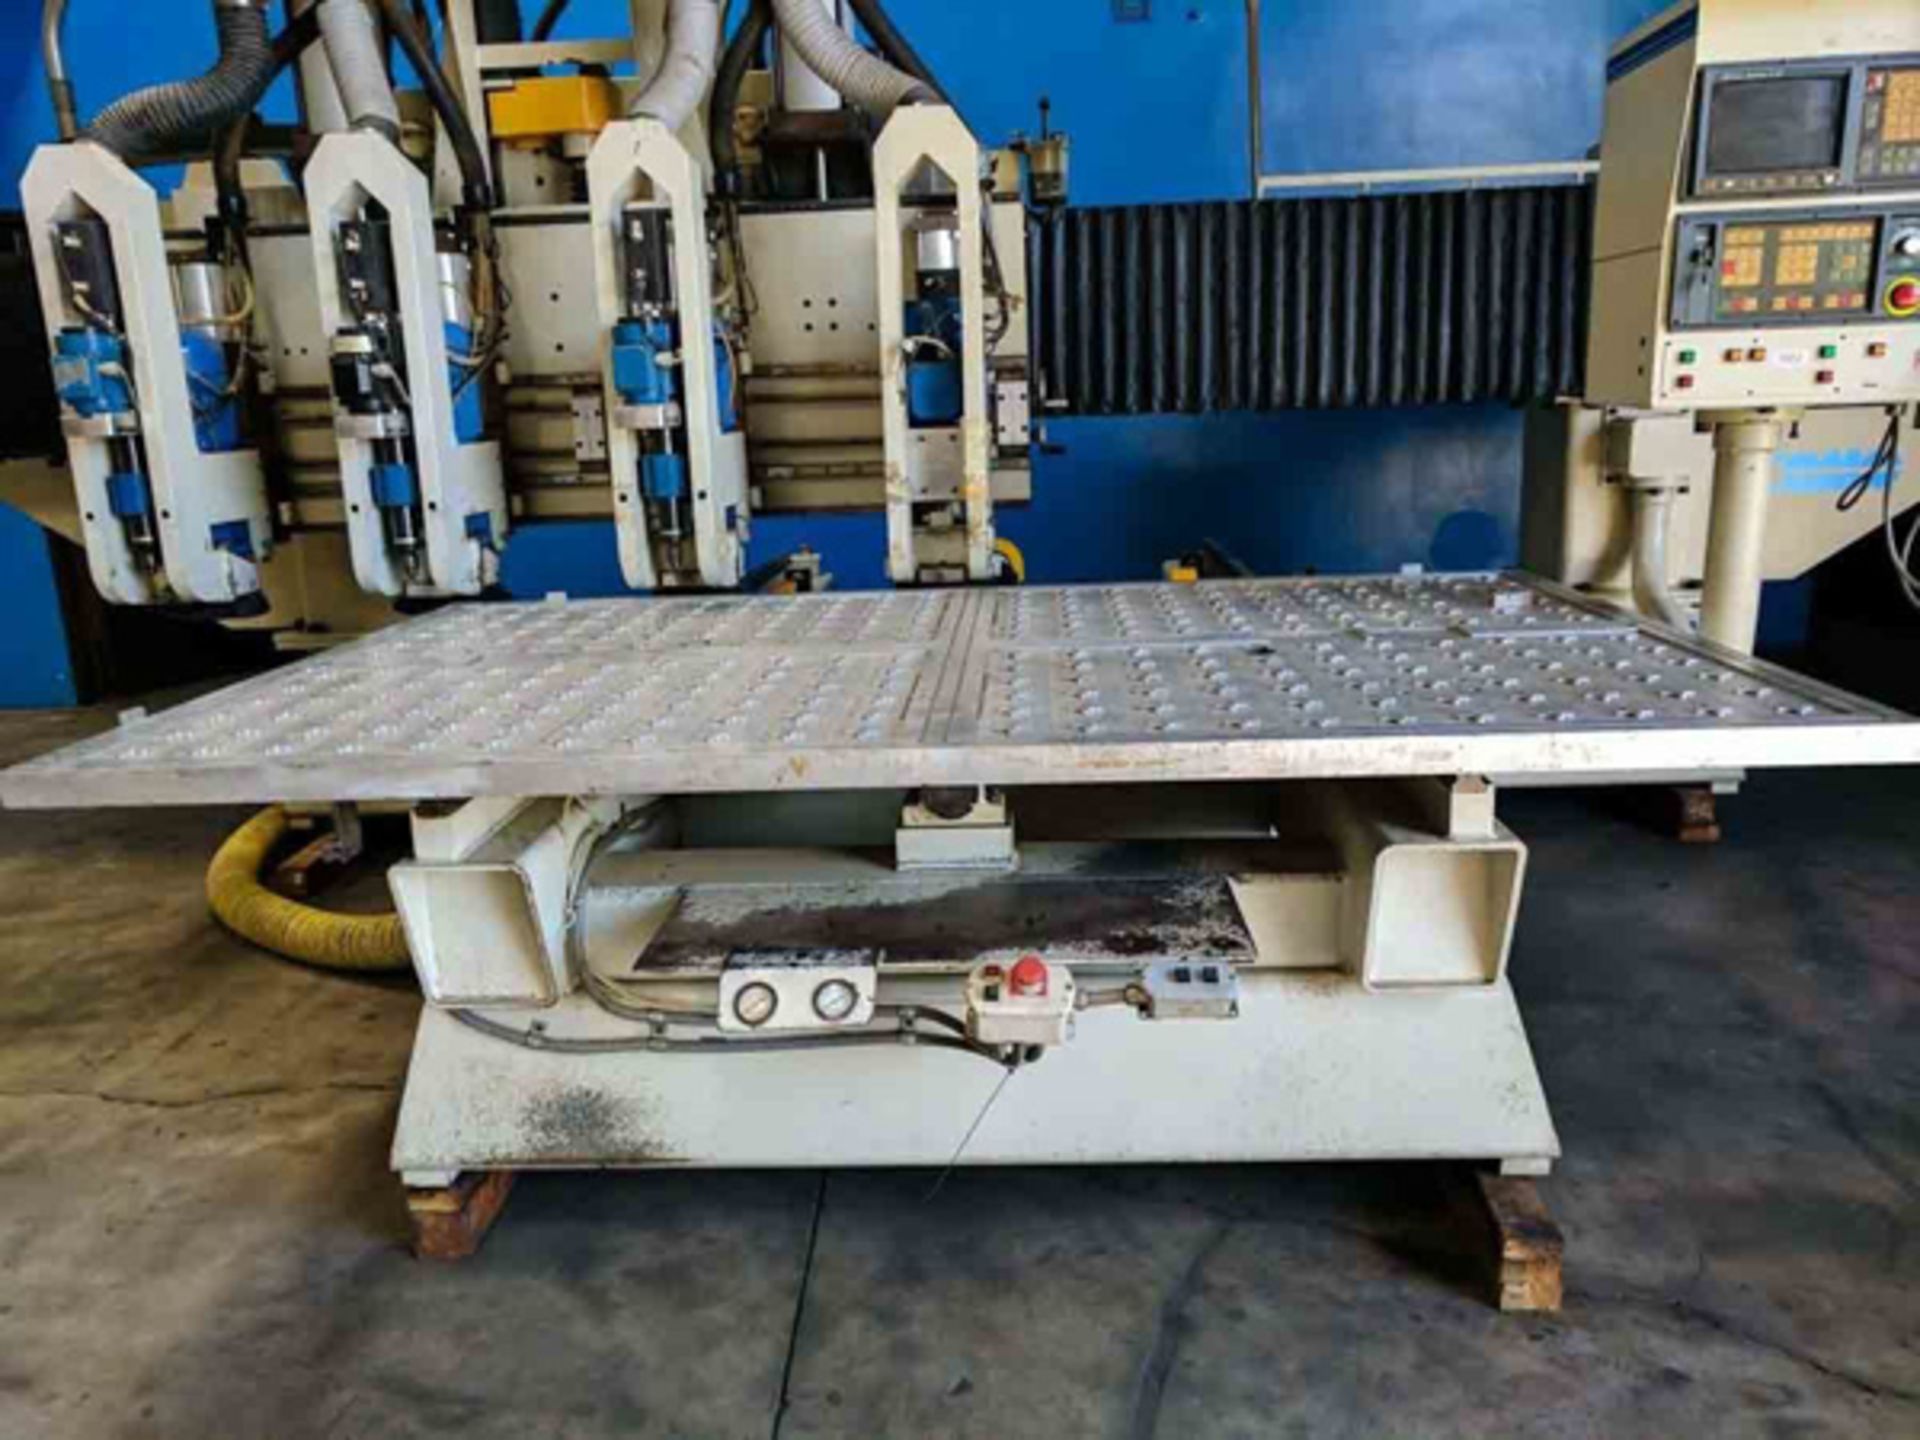 1990 Komo CNC Table Router | 96" x 60" x 8", Mdl: VR805Q, S/N: 1552 - 3562JVHP - Image 20 of 25